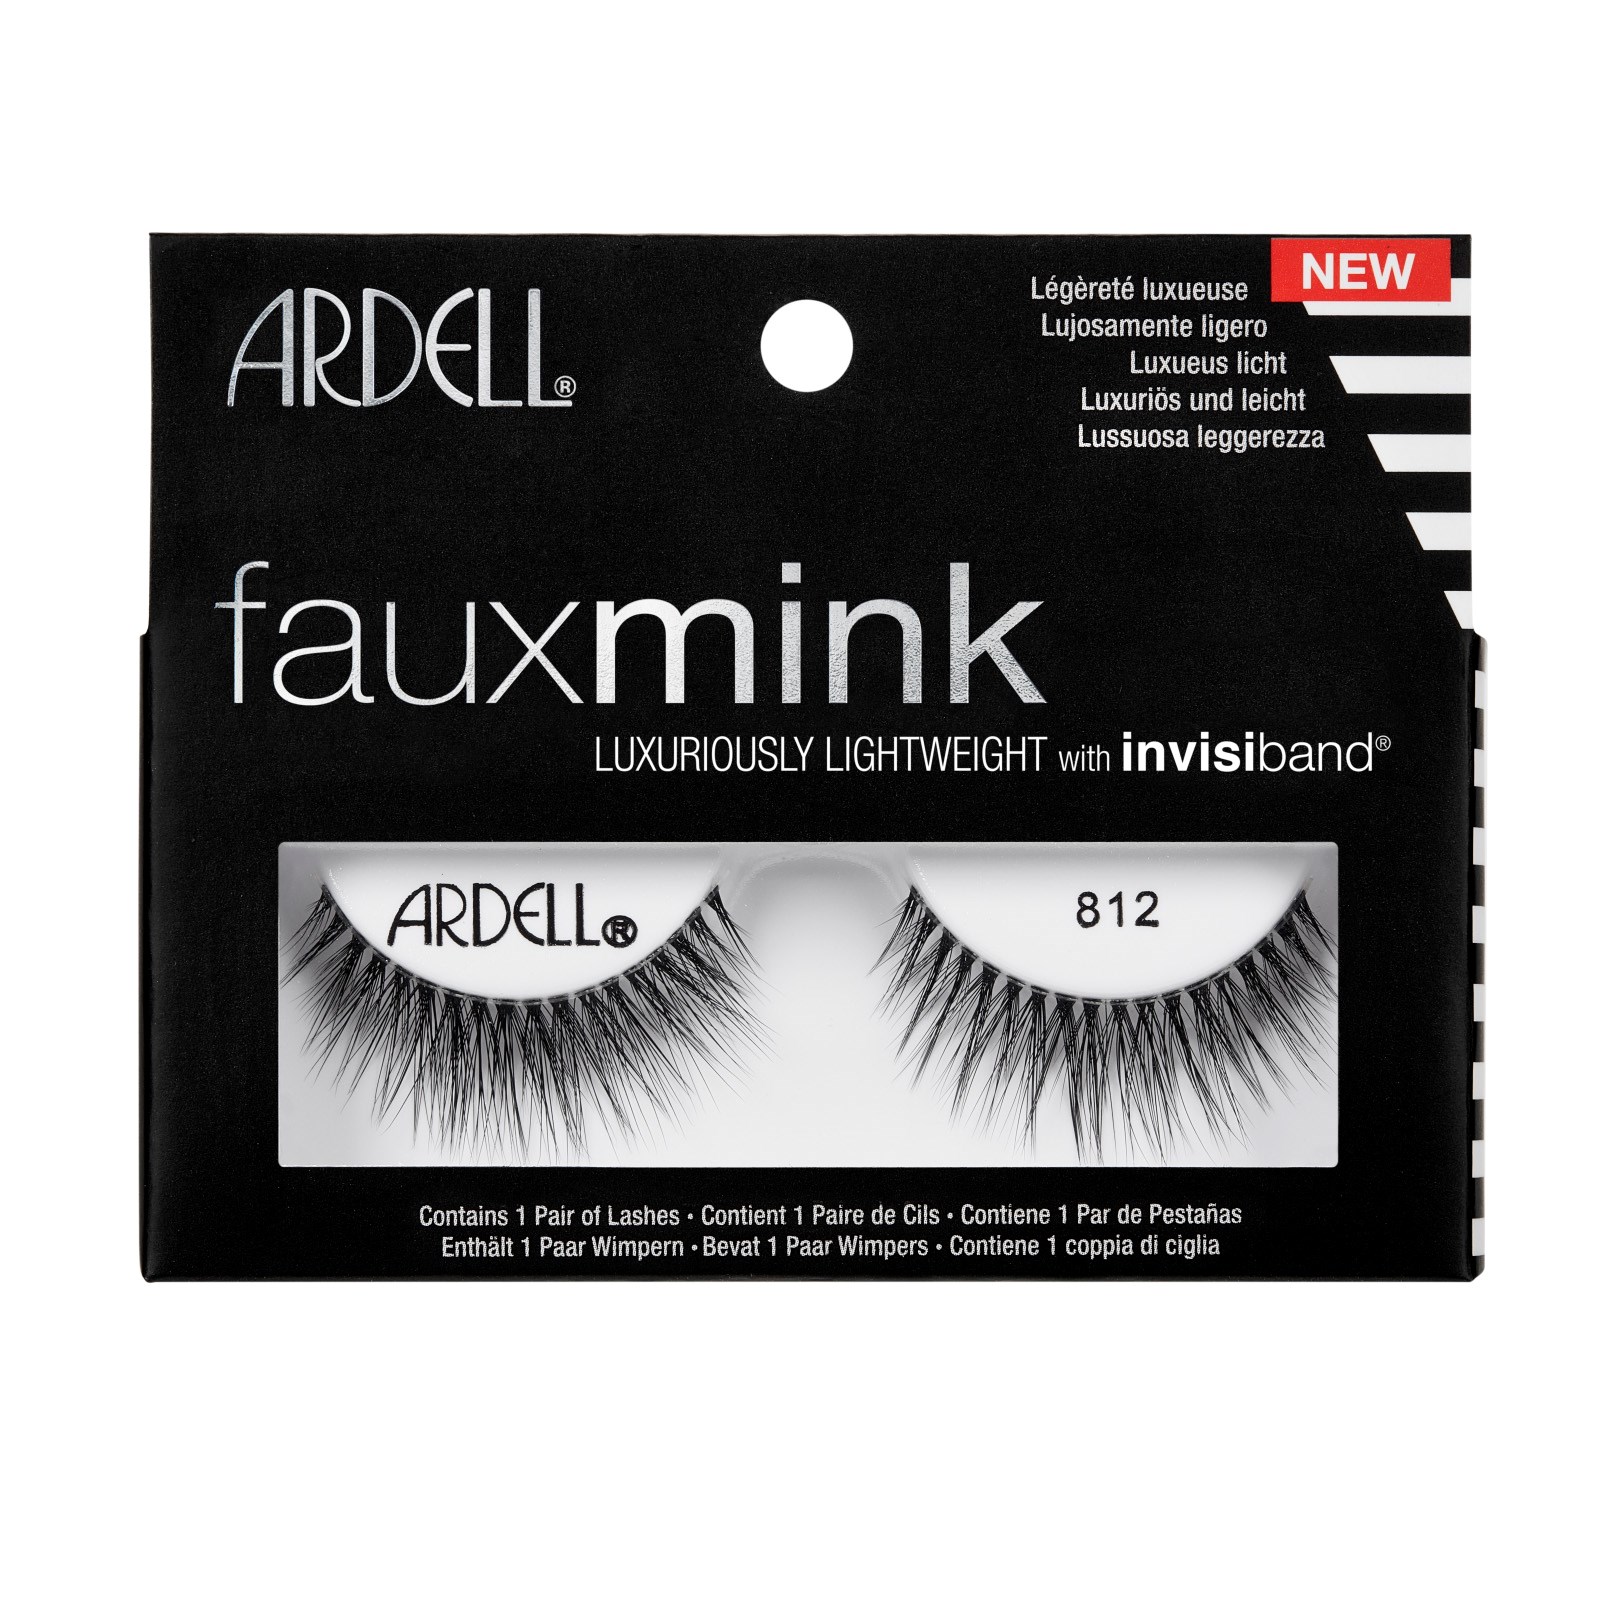 Ardell Faux Mink Luxuriously Lightweight Lashes 812